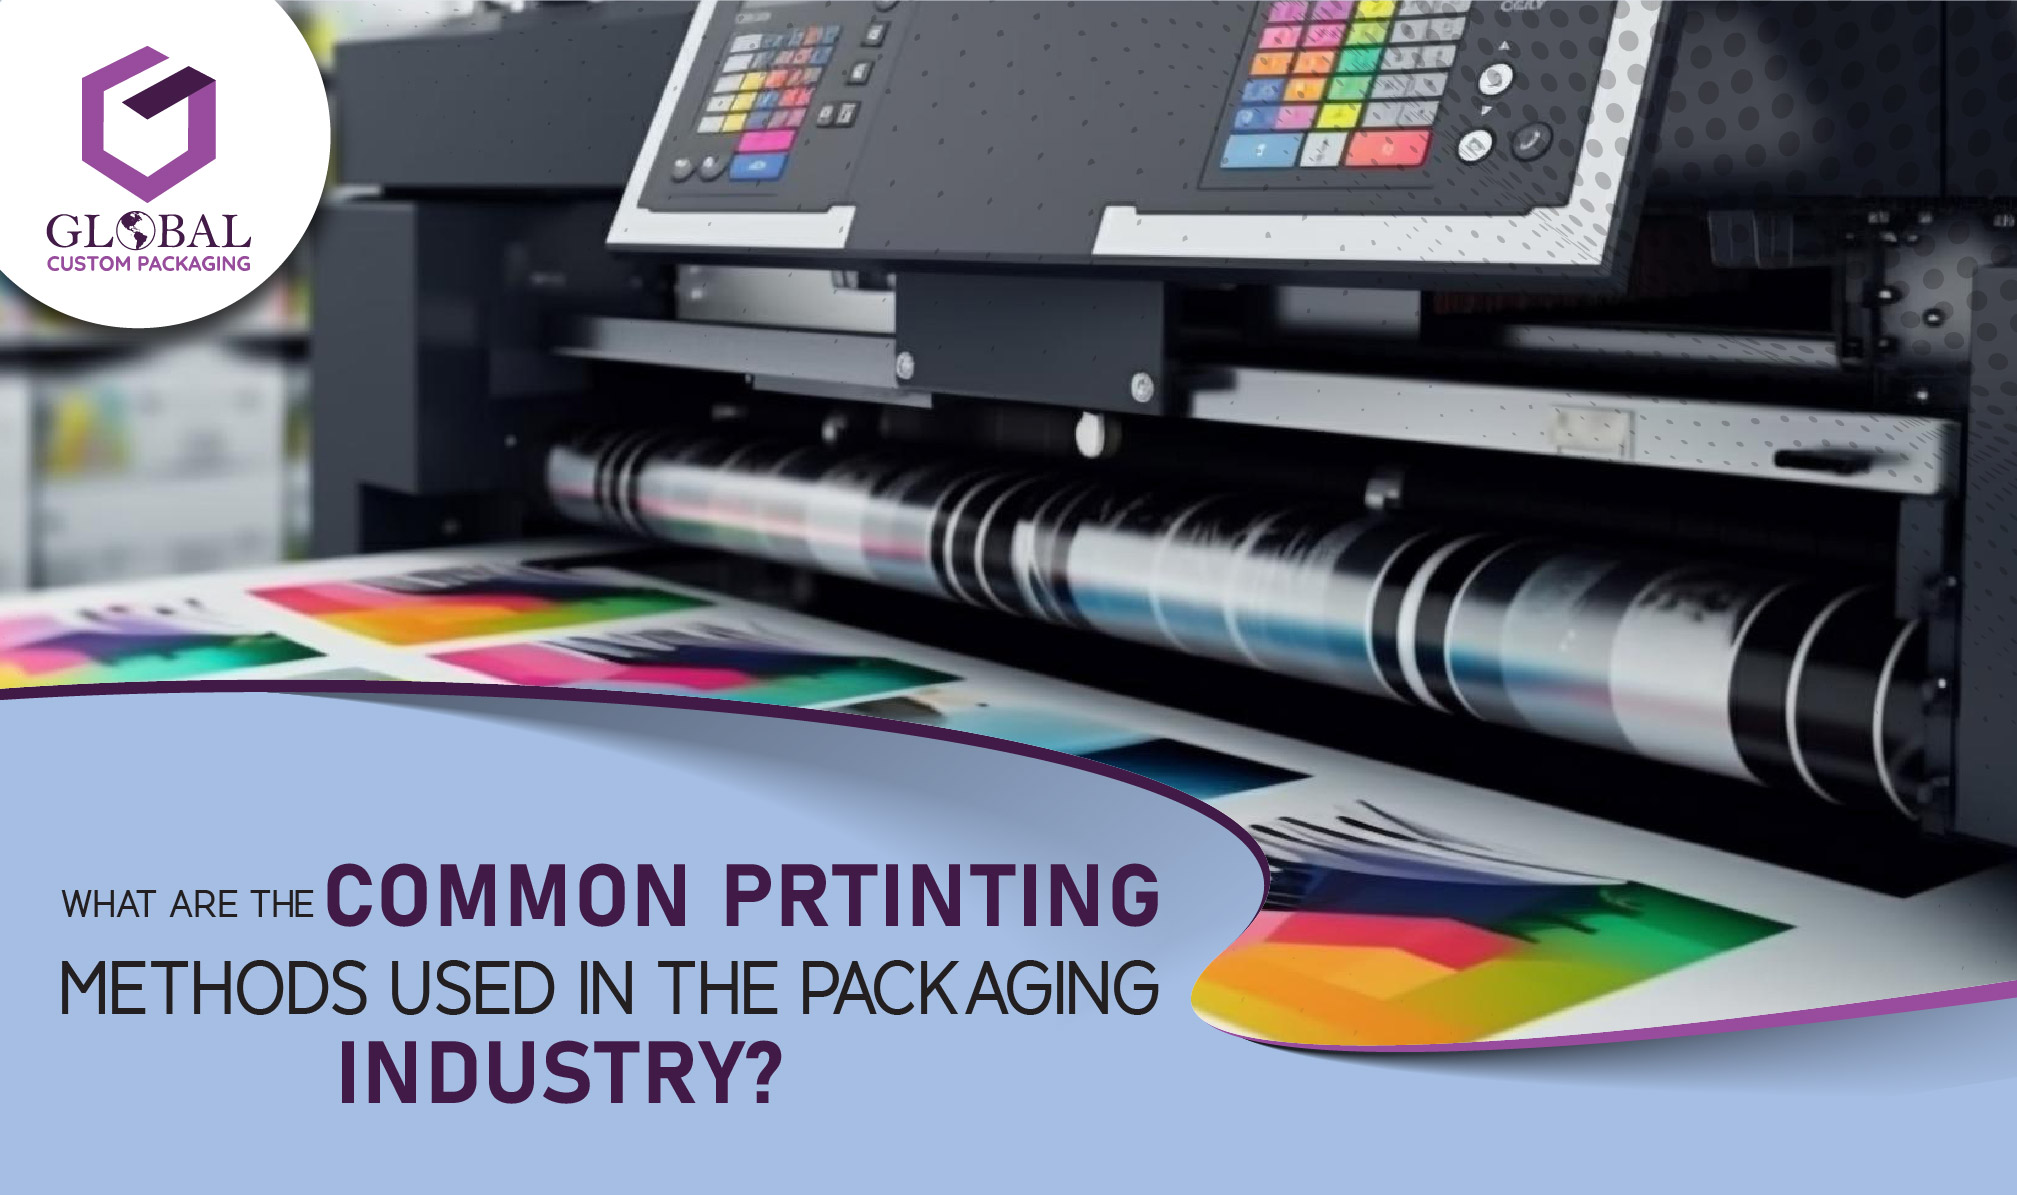 What Are The Common Printing Methods Used In The Packaging Industry?